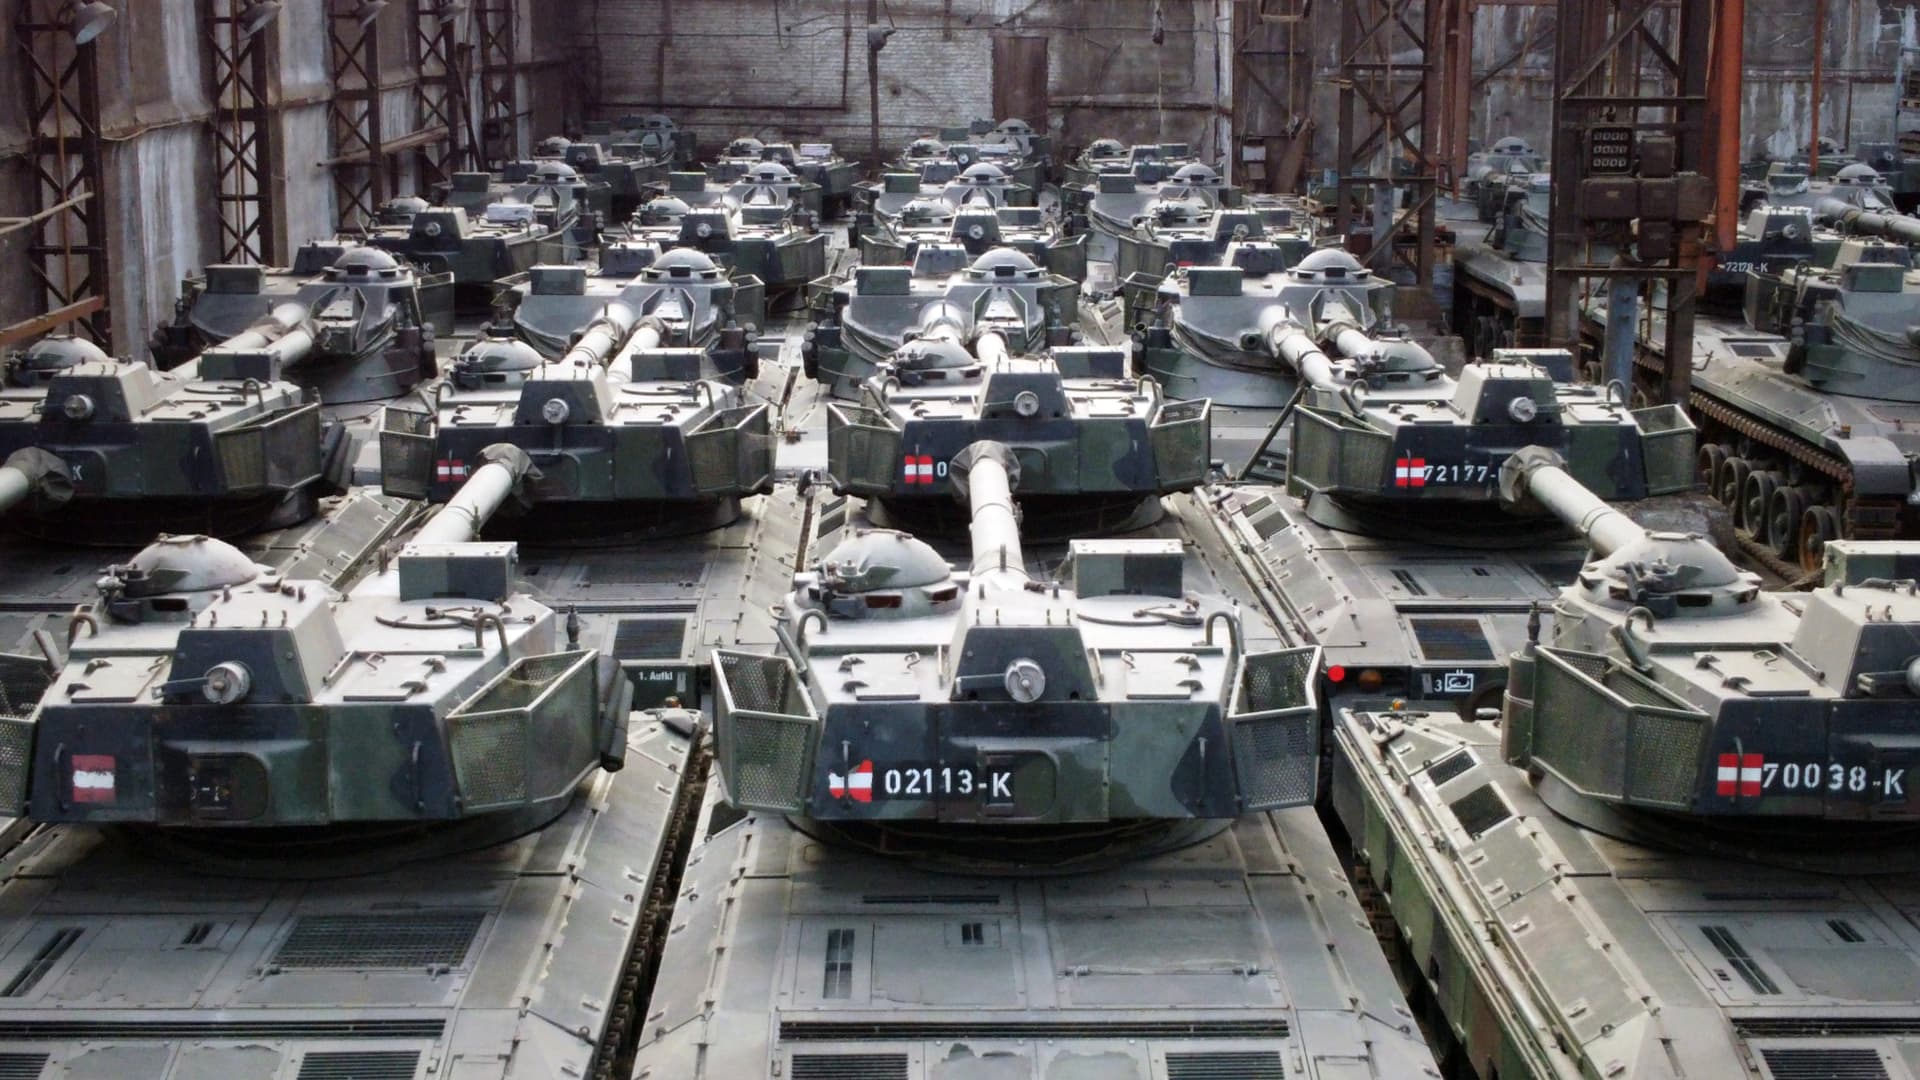 German-made Leopard 1 tanks, which were removed from the Belgian army's inventory years ago and sold to a defense industry company are seen at a warehouse in Tournai, Belgium on February 02, 2023. 